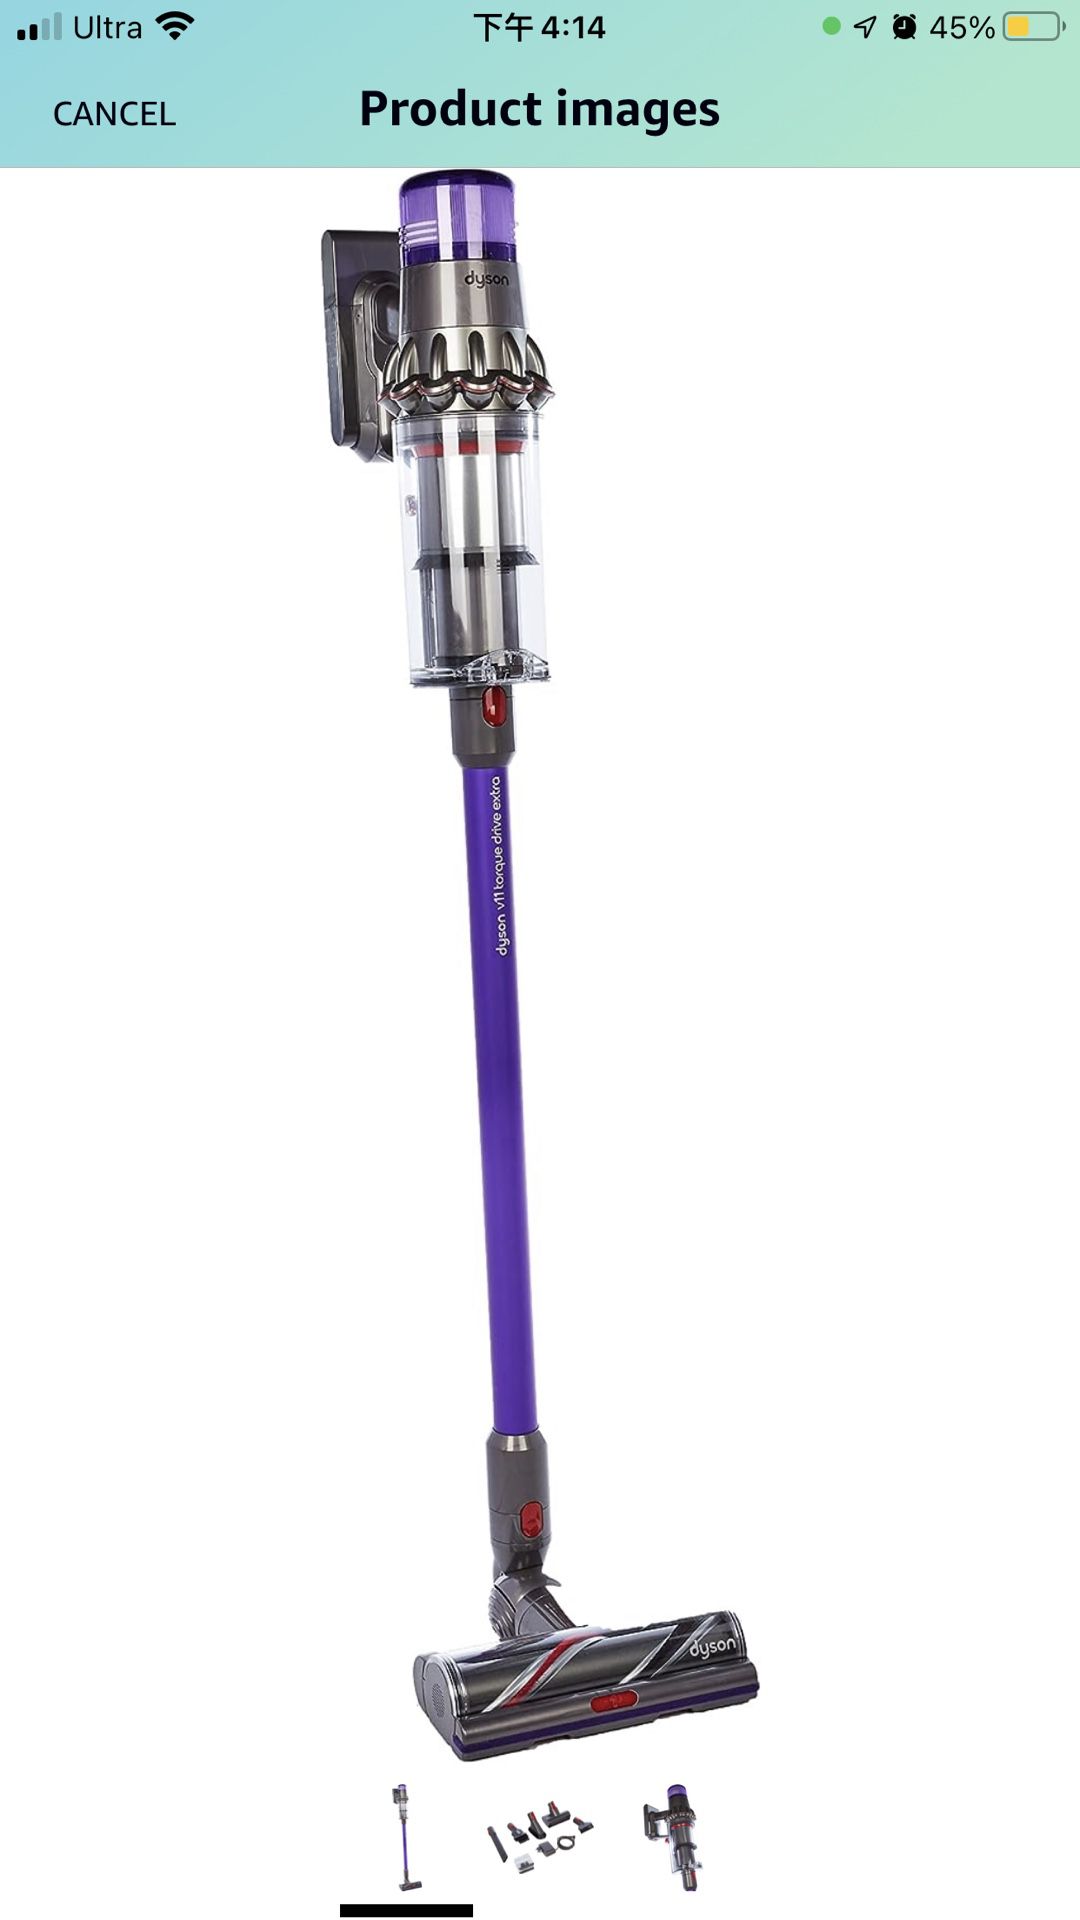 Dyson V11 Torque Drive Cord-Free Vacuum Cleaner + Extra Tool Bundle